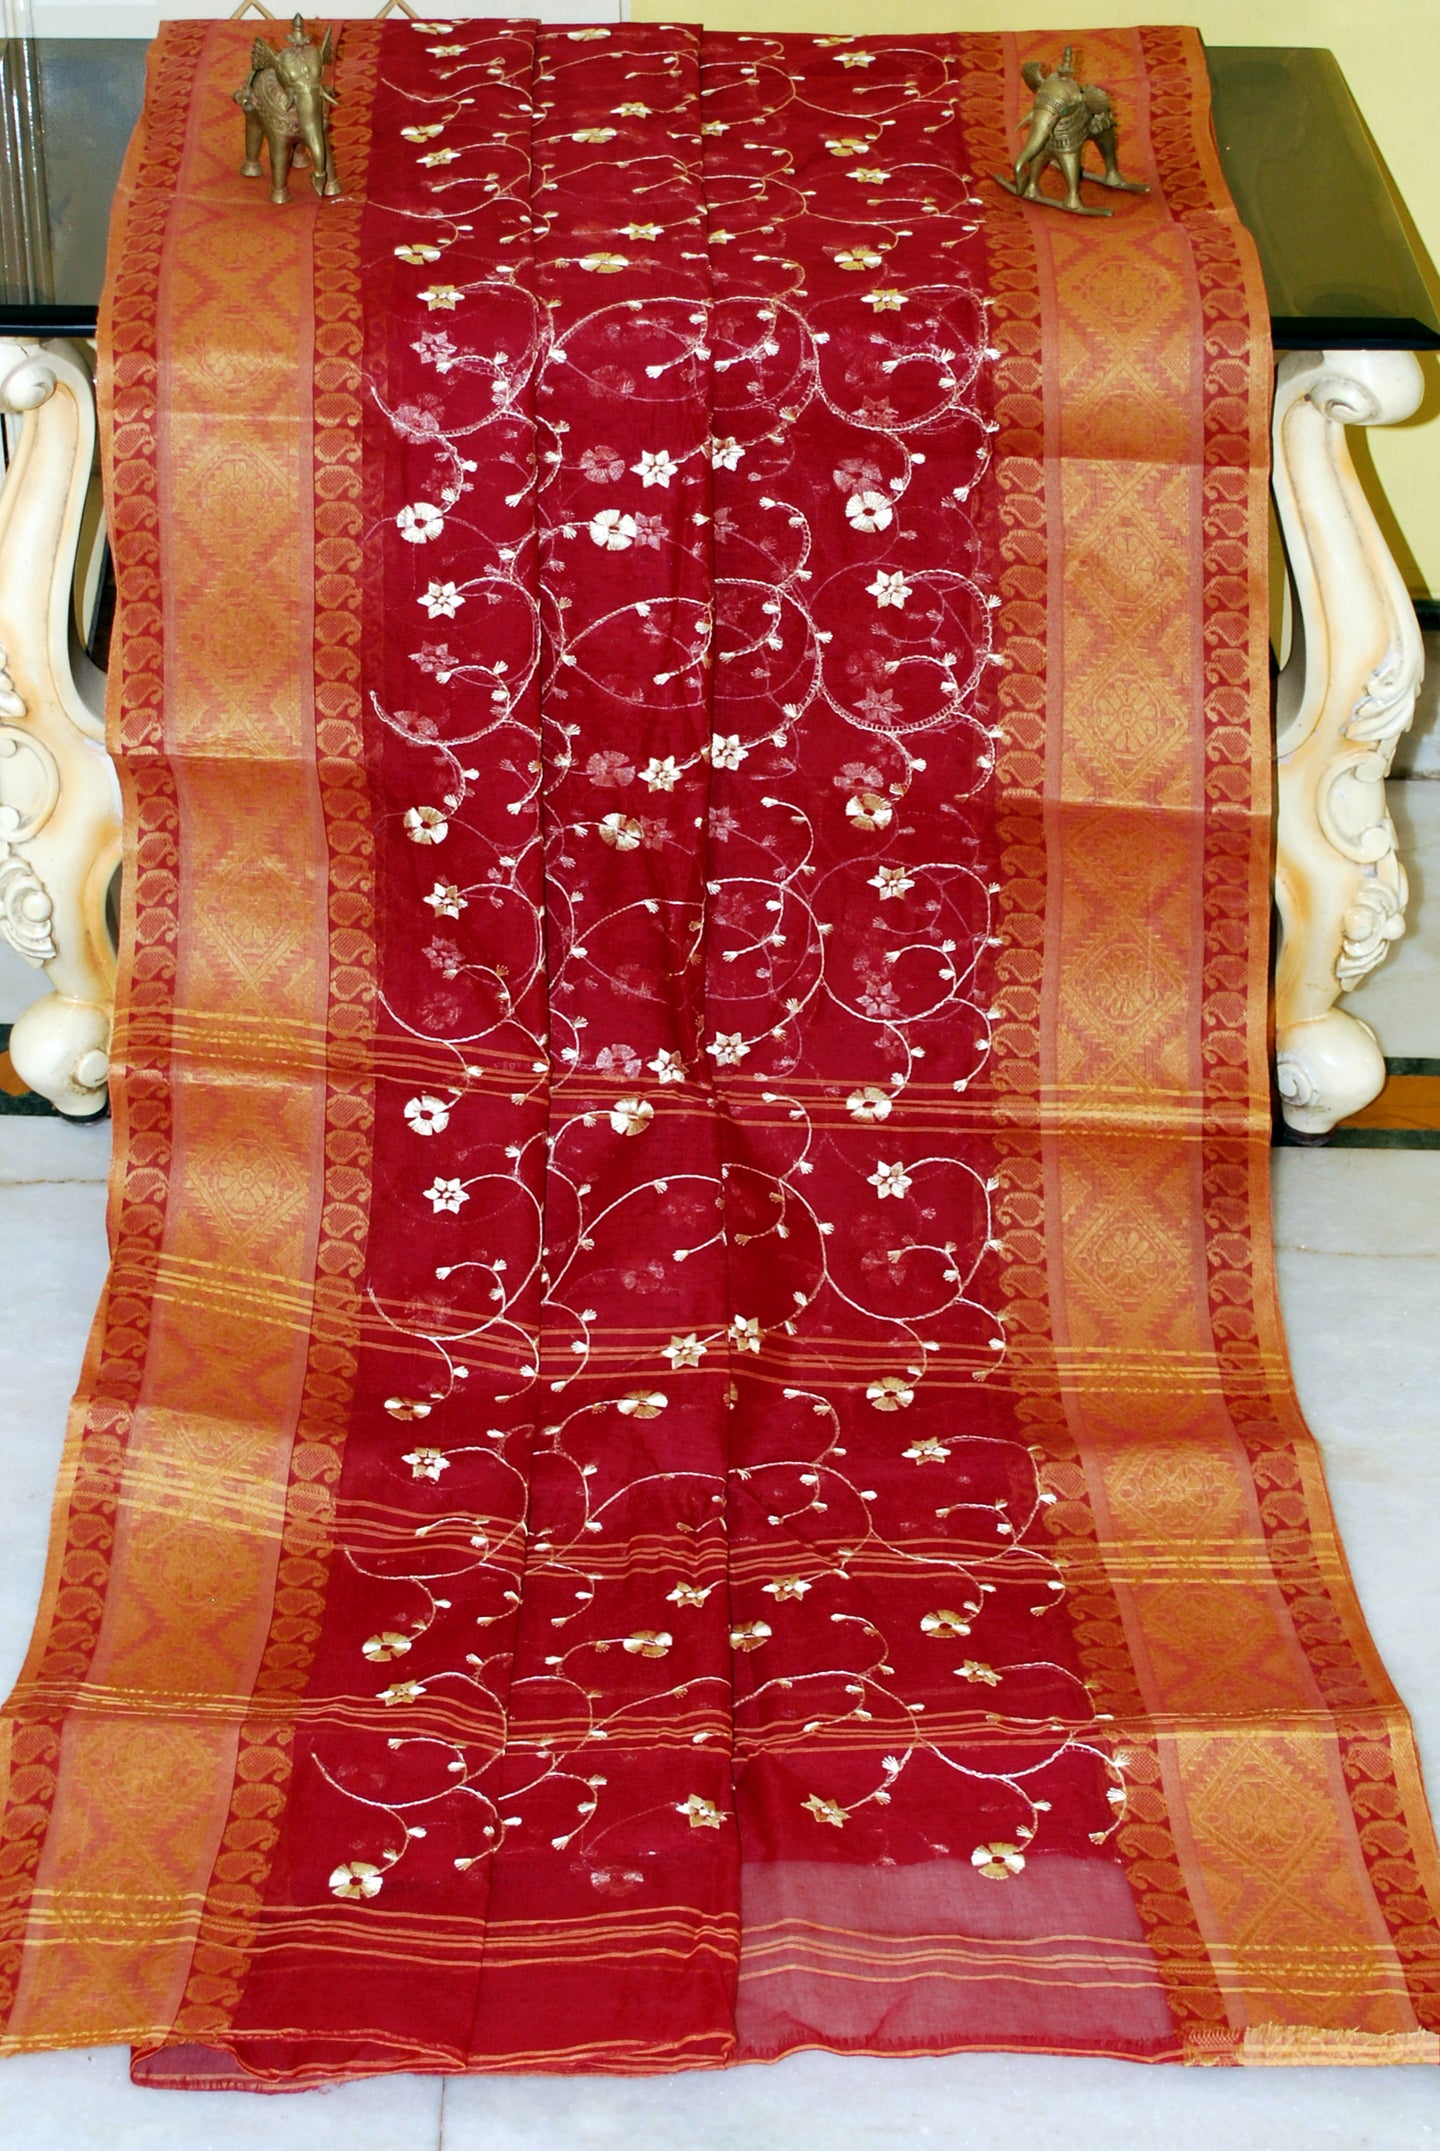 Bengal Handloom Cotton Saree with Floral Jaal Embroidery Work in Dark Red, Biscotti and Off White